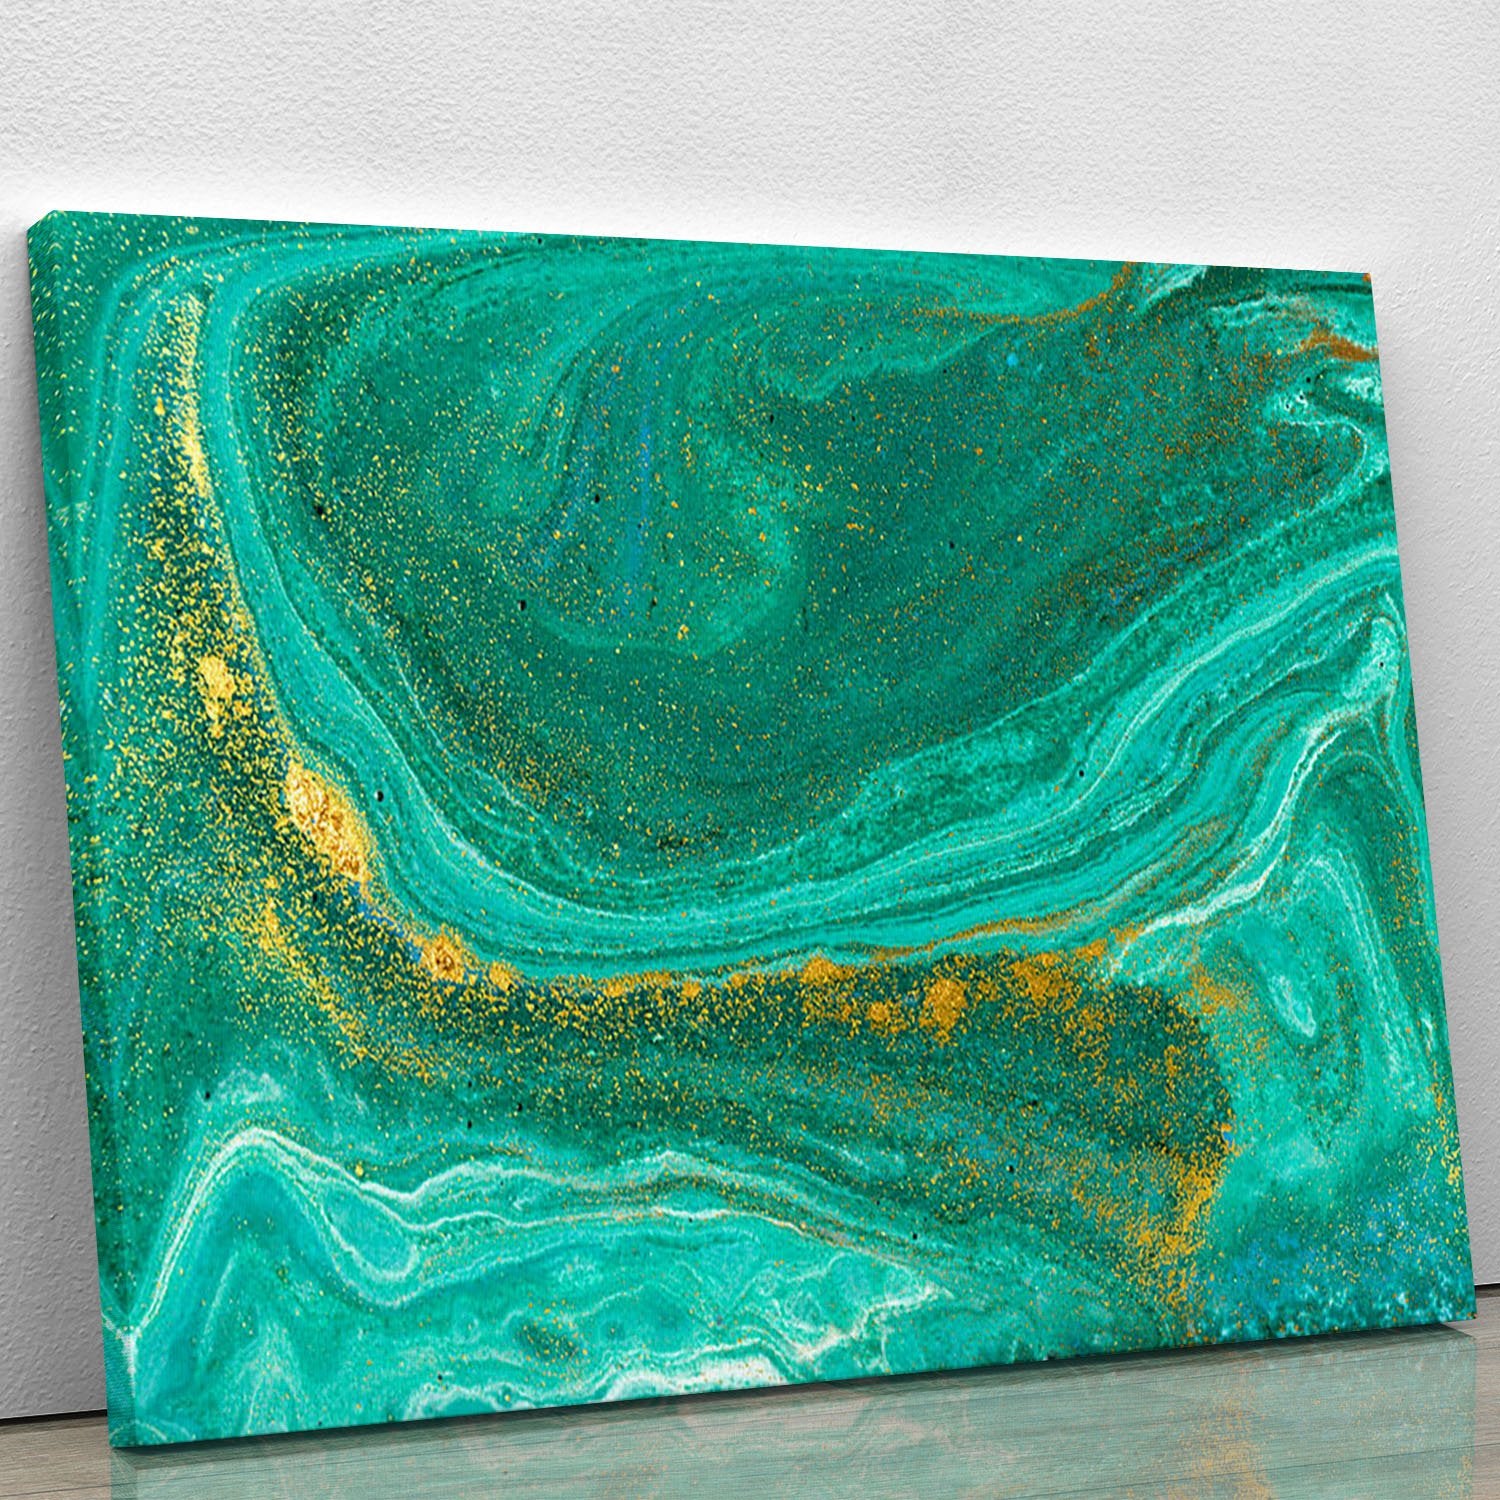 Green Swirled Marble Canvas Print or Poster